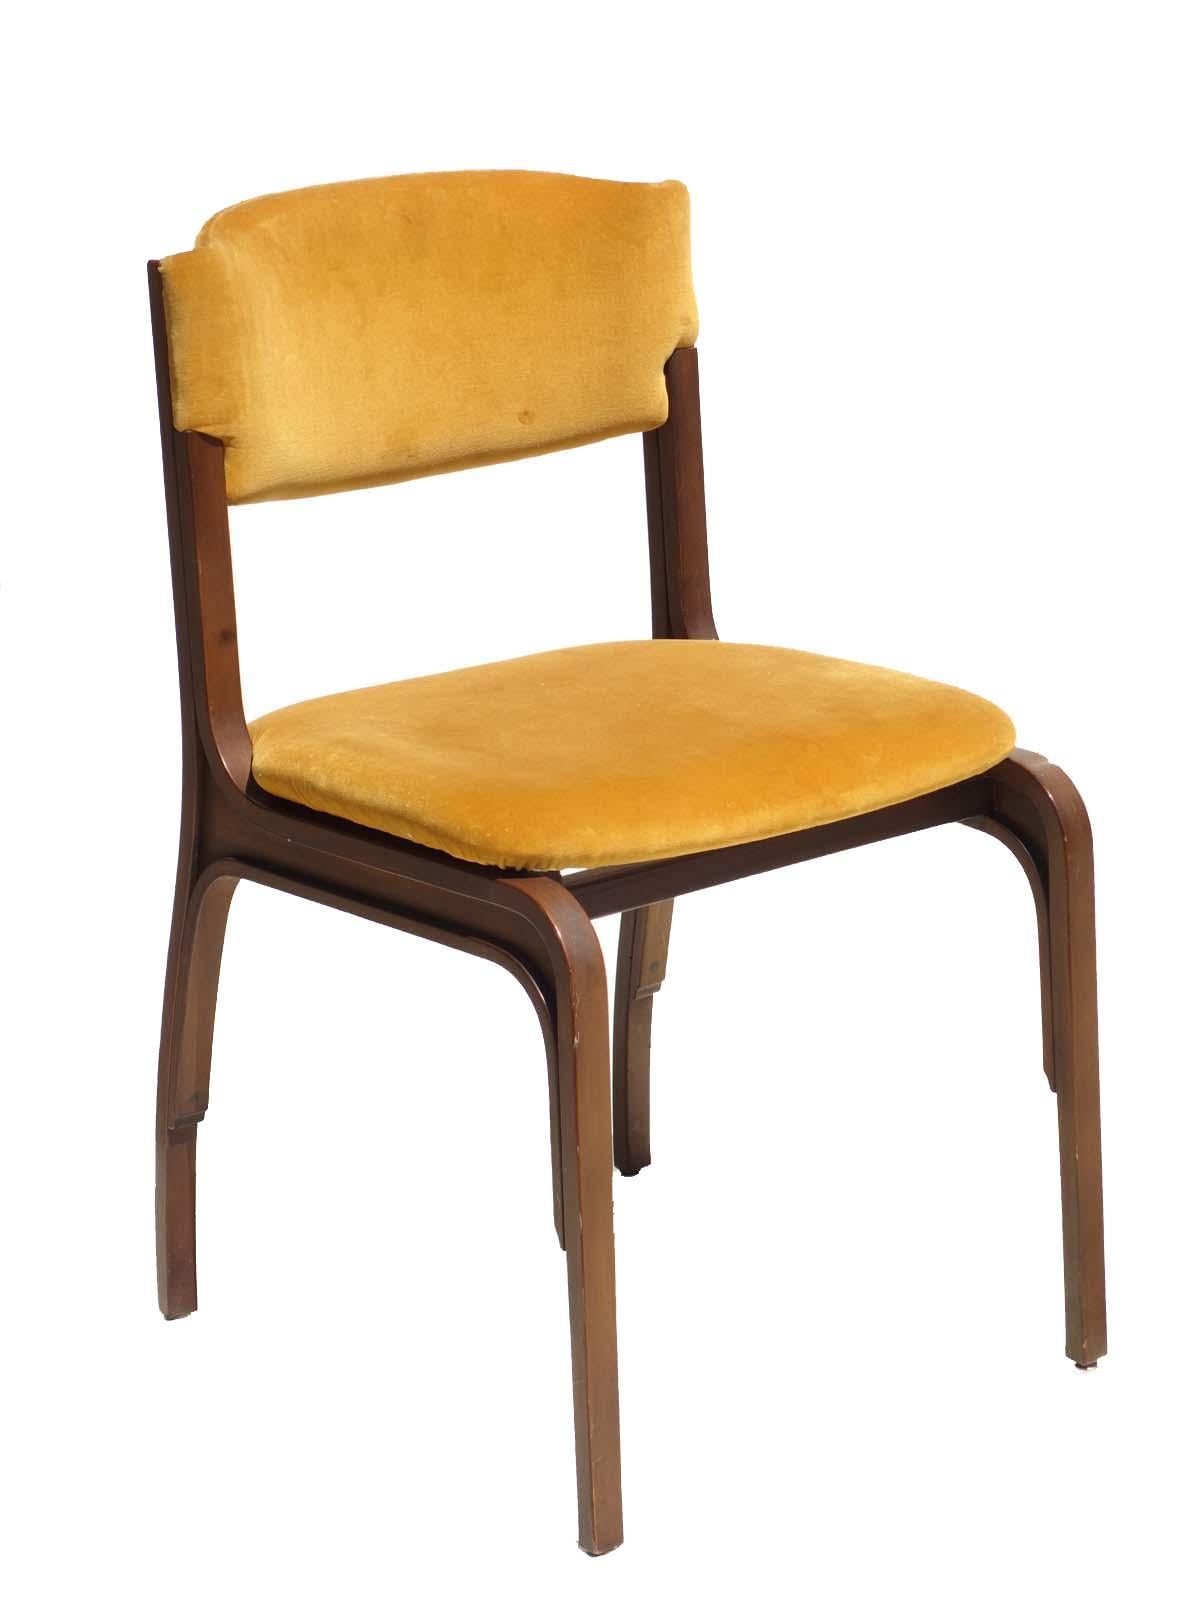 Yellow velvet and wood.
Very good condition.
Measures: H seat 47 cm
Italy, 1964.